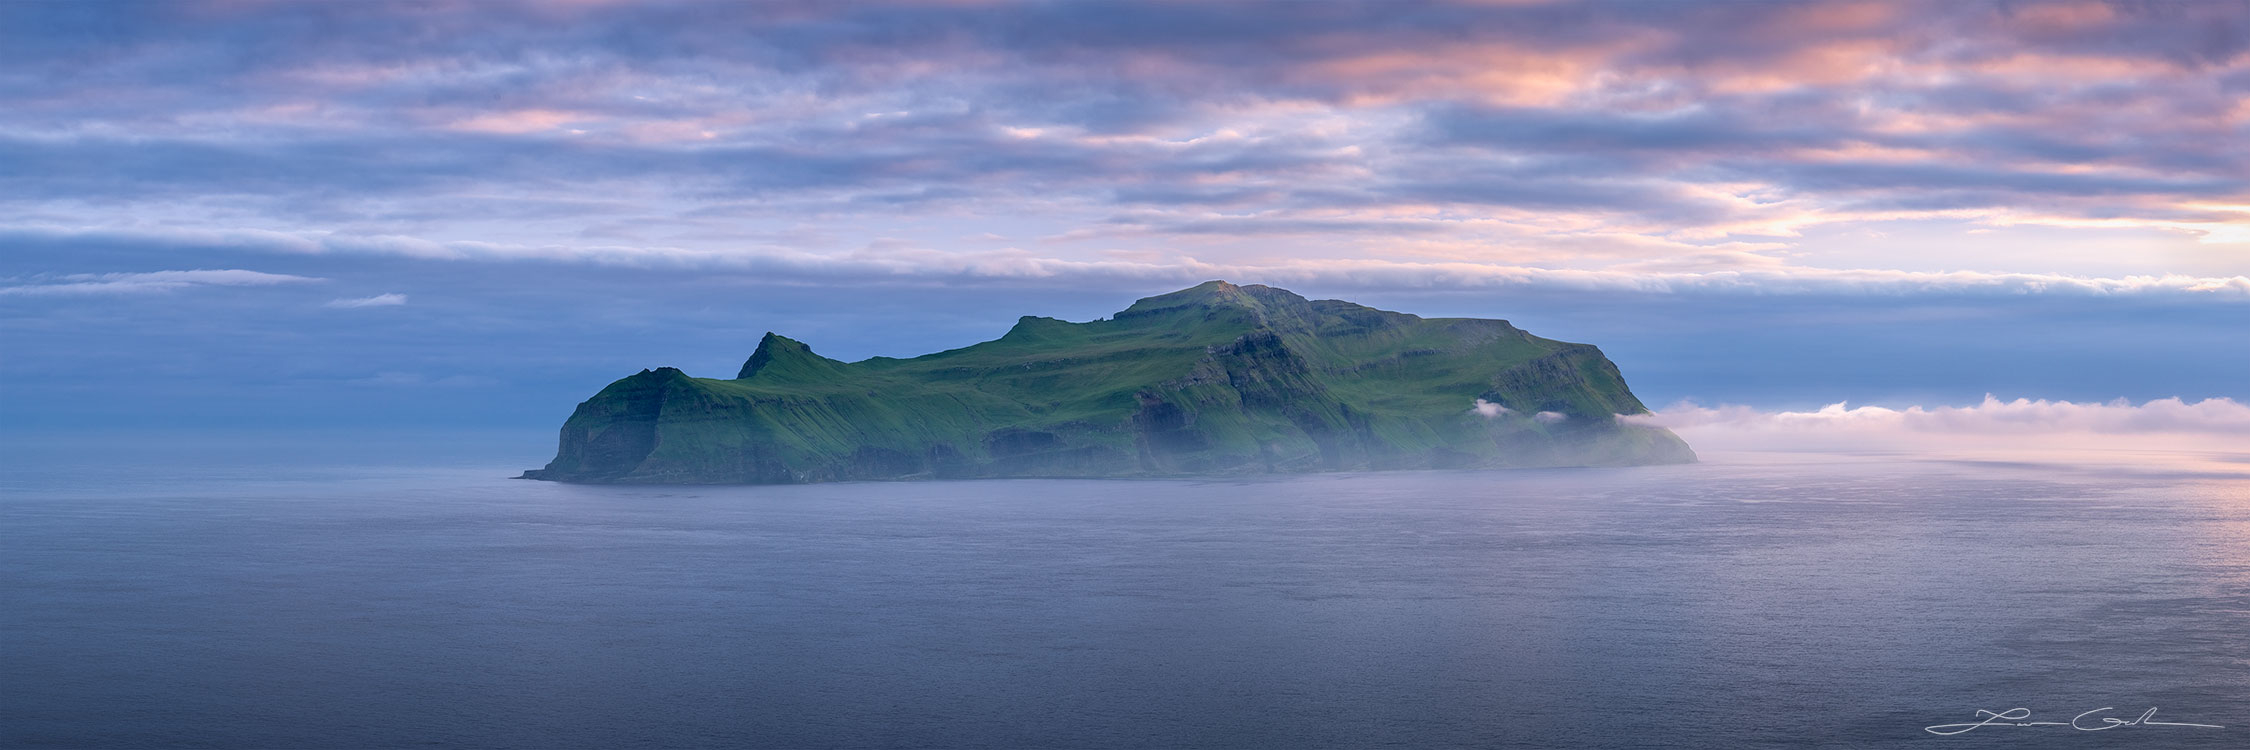 A late sunset with some pink and blue clouds above a panoramic island in the middle of the ocean - Faroe Islands - Gintchin Fine Art